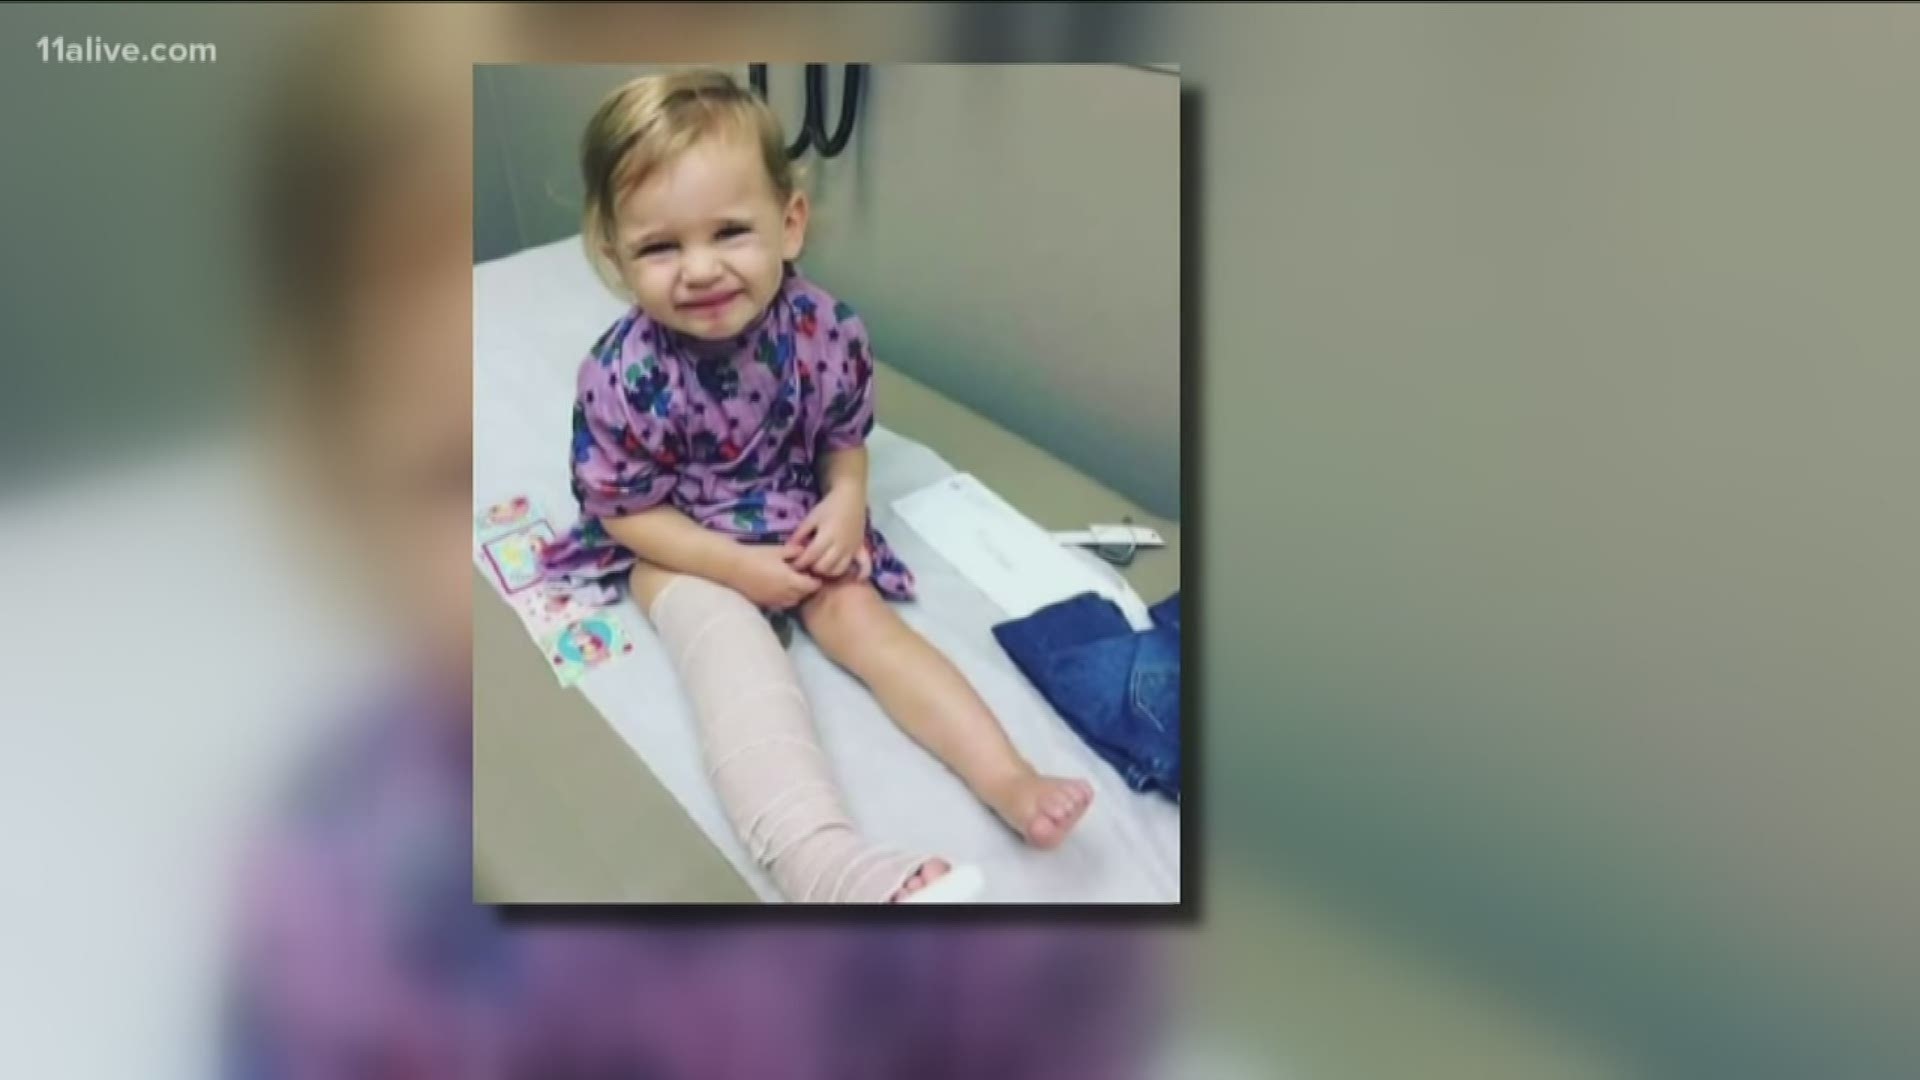 Doctors said the toddler's injuries were very painful and required a lot of force to create.